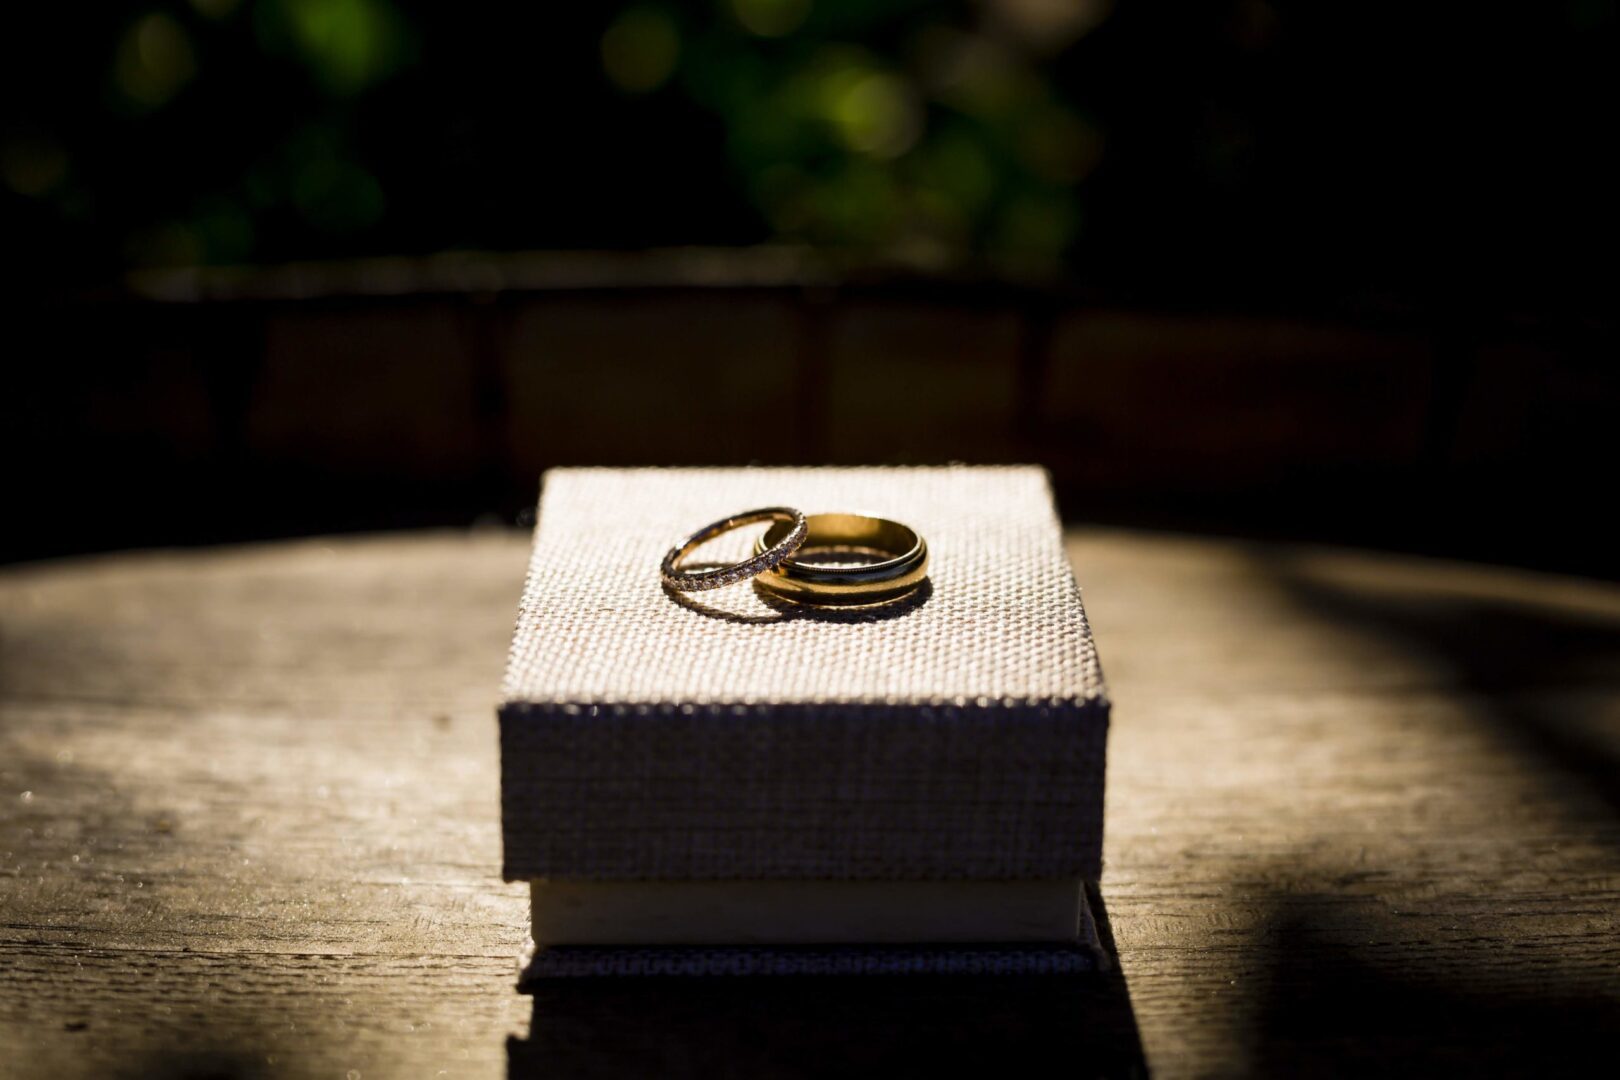 Two wedding rings in a box on top of a wooden table.